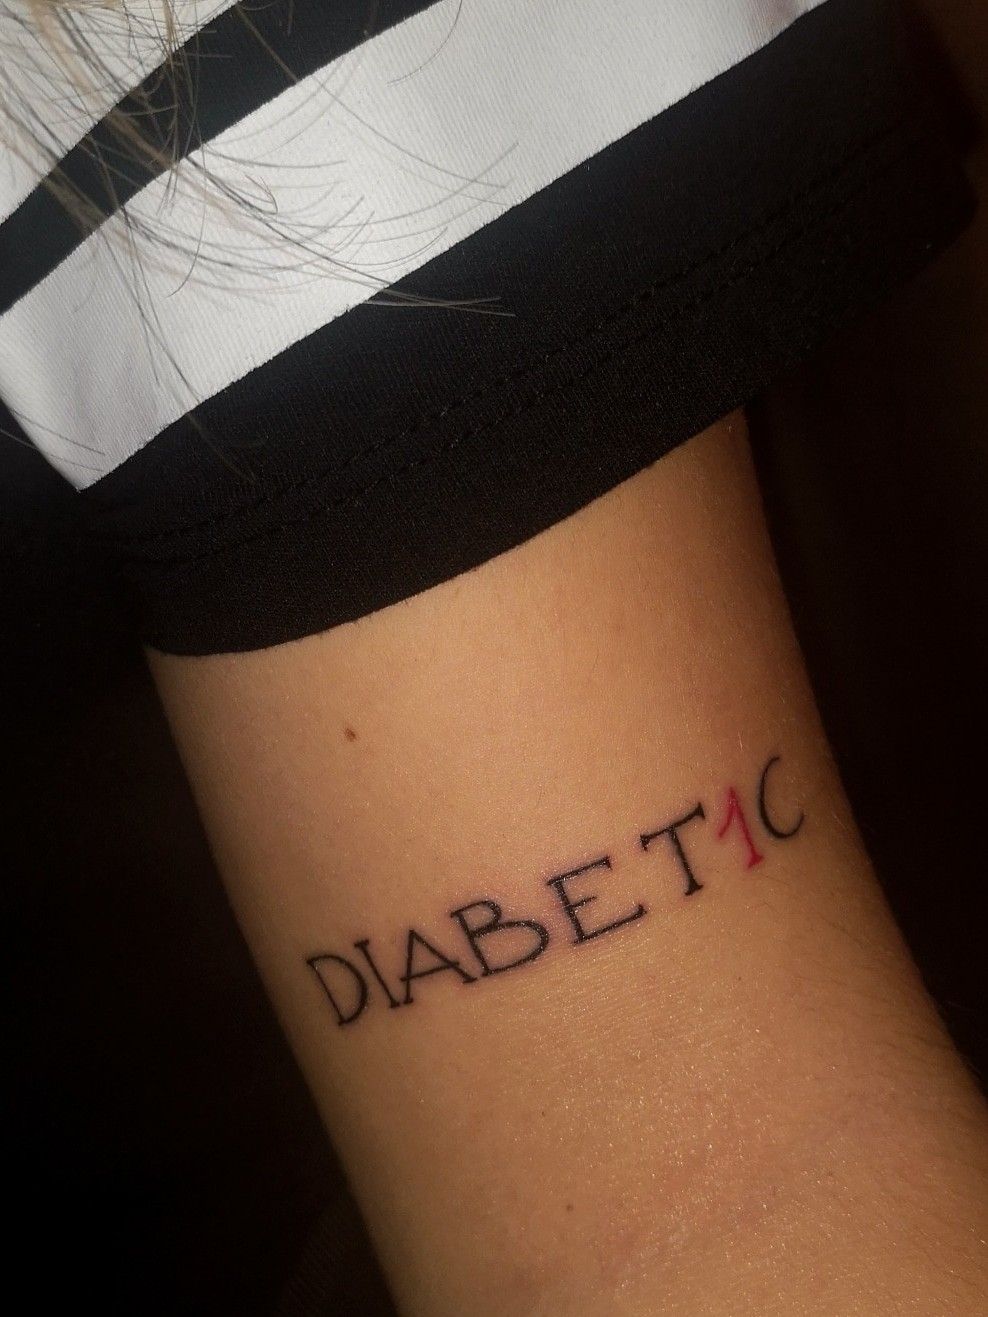 Diabetic Ink on Tumblr: Brand new diabetic ink from Trish!